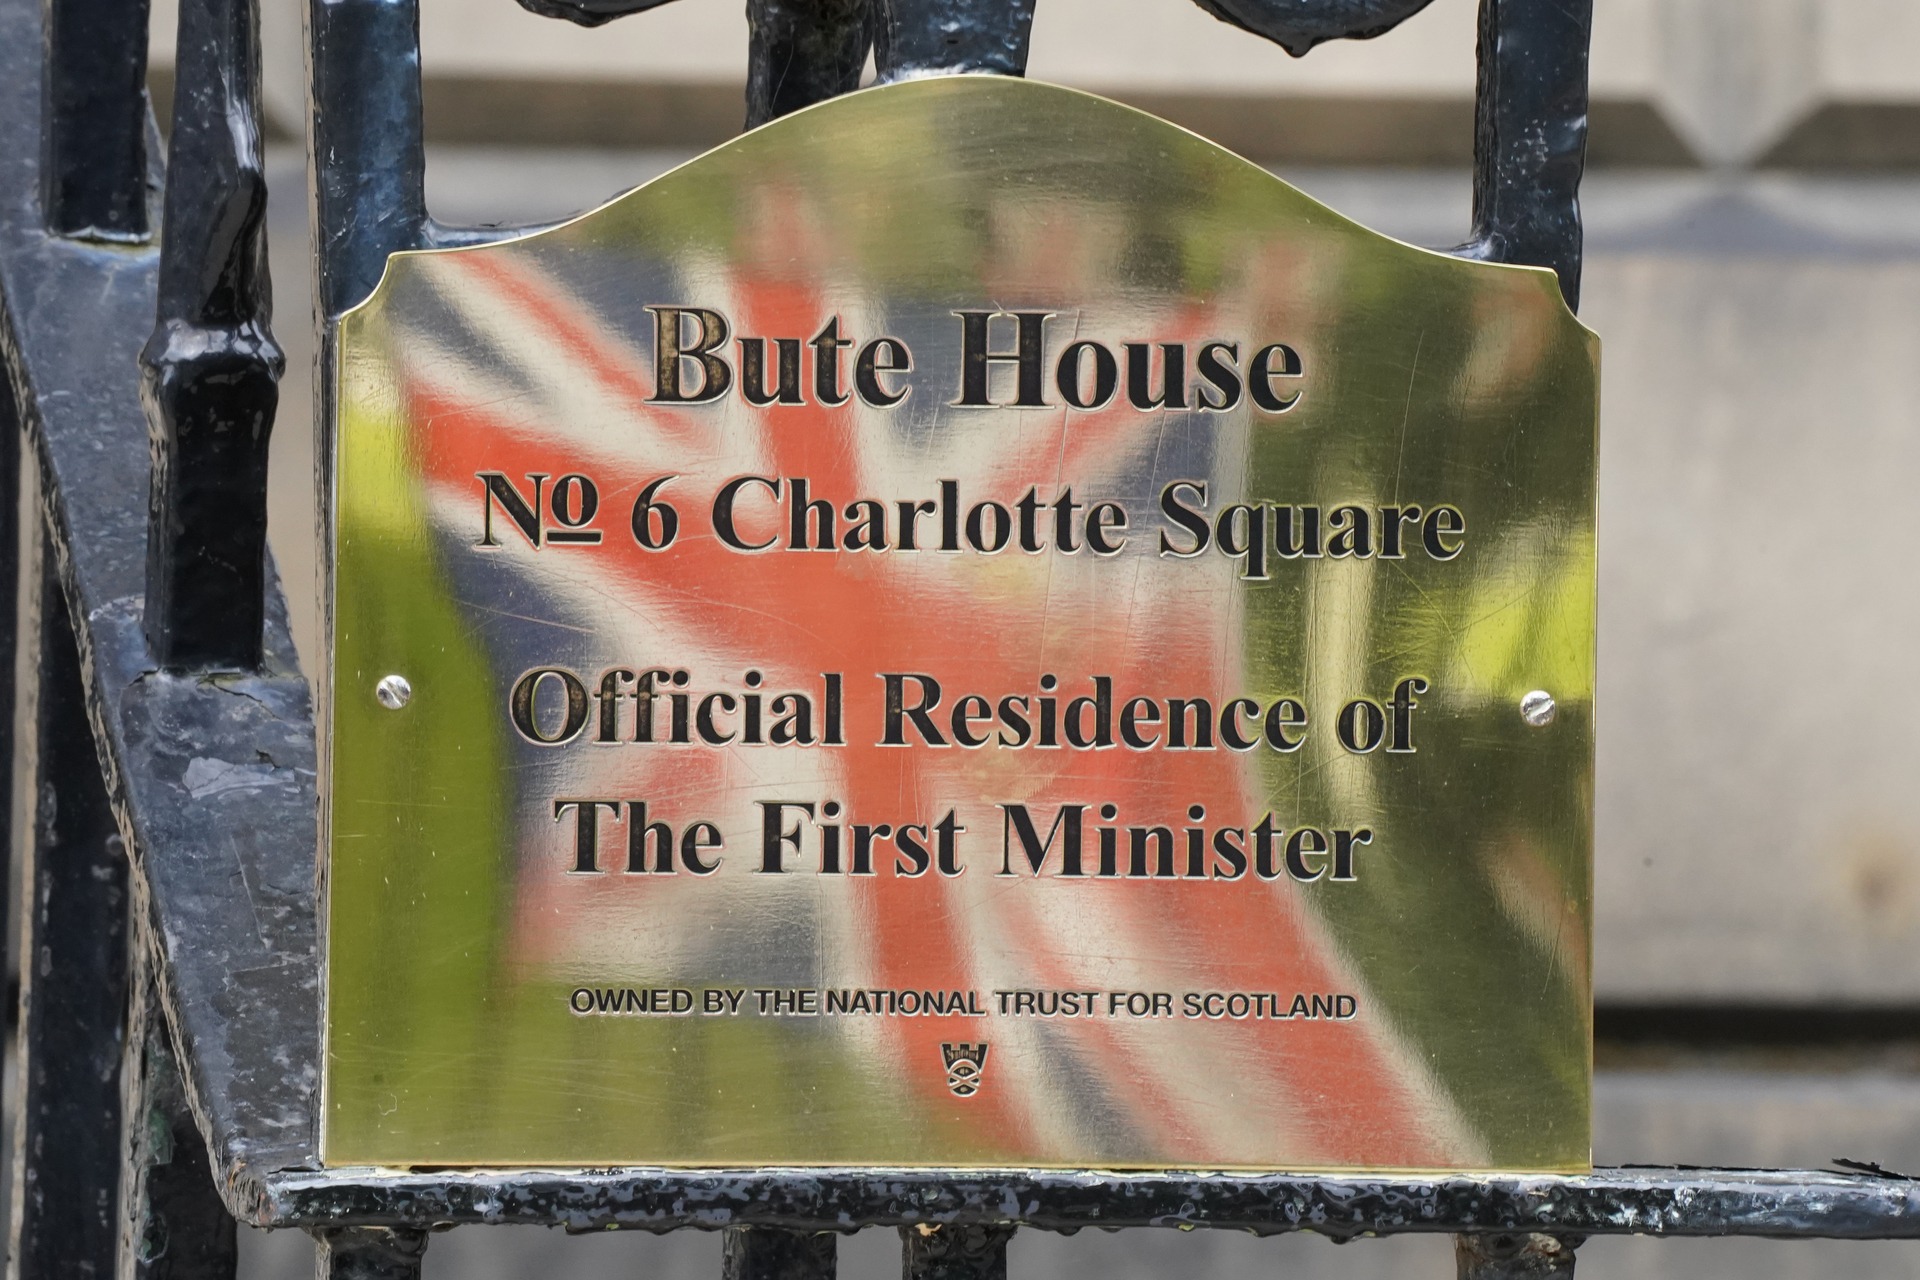 The Bute House Agreement – named after the official residence of the Scottish First Minister – gives the SNP a majority at Holyrood.